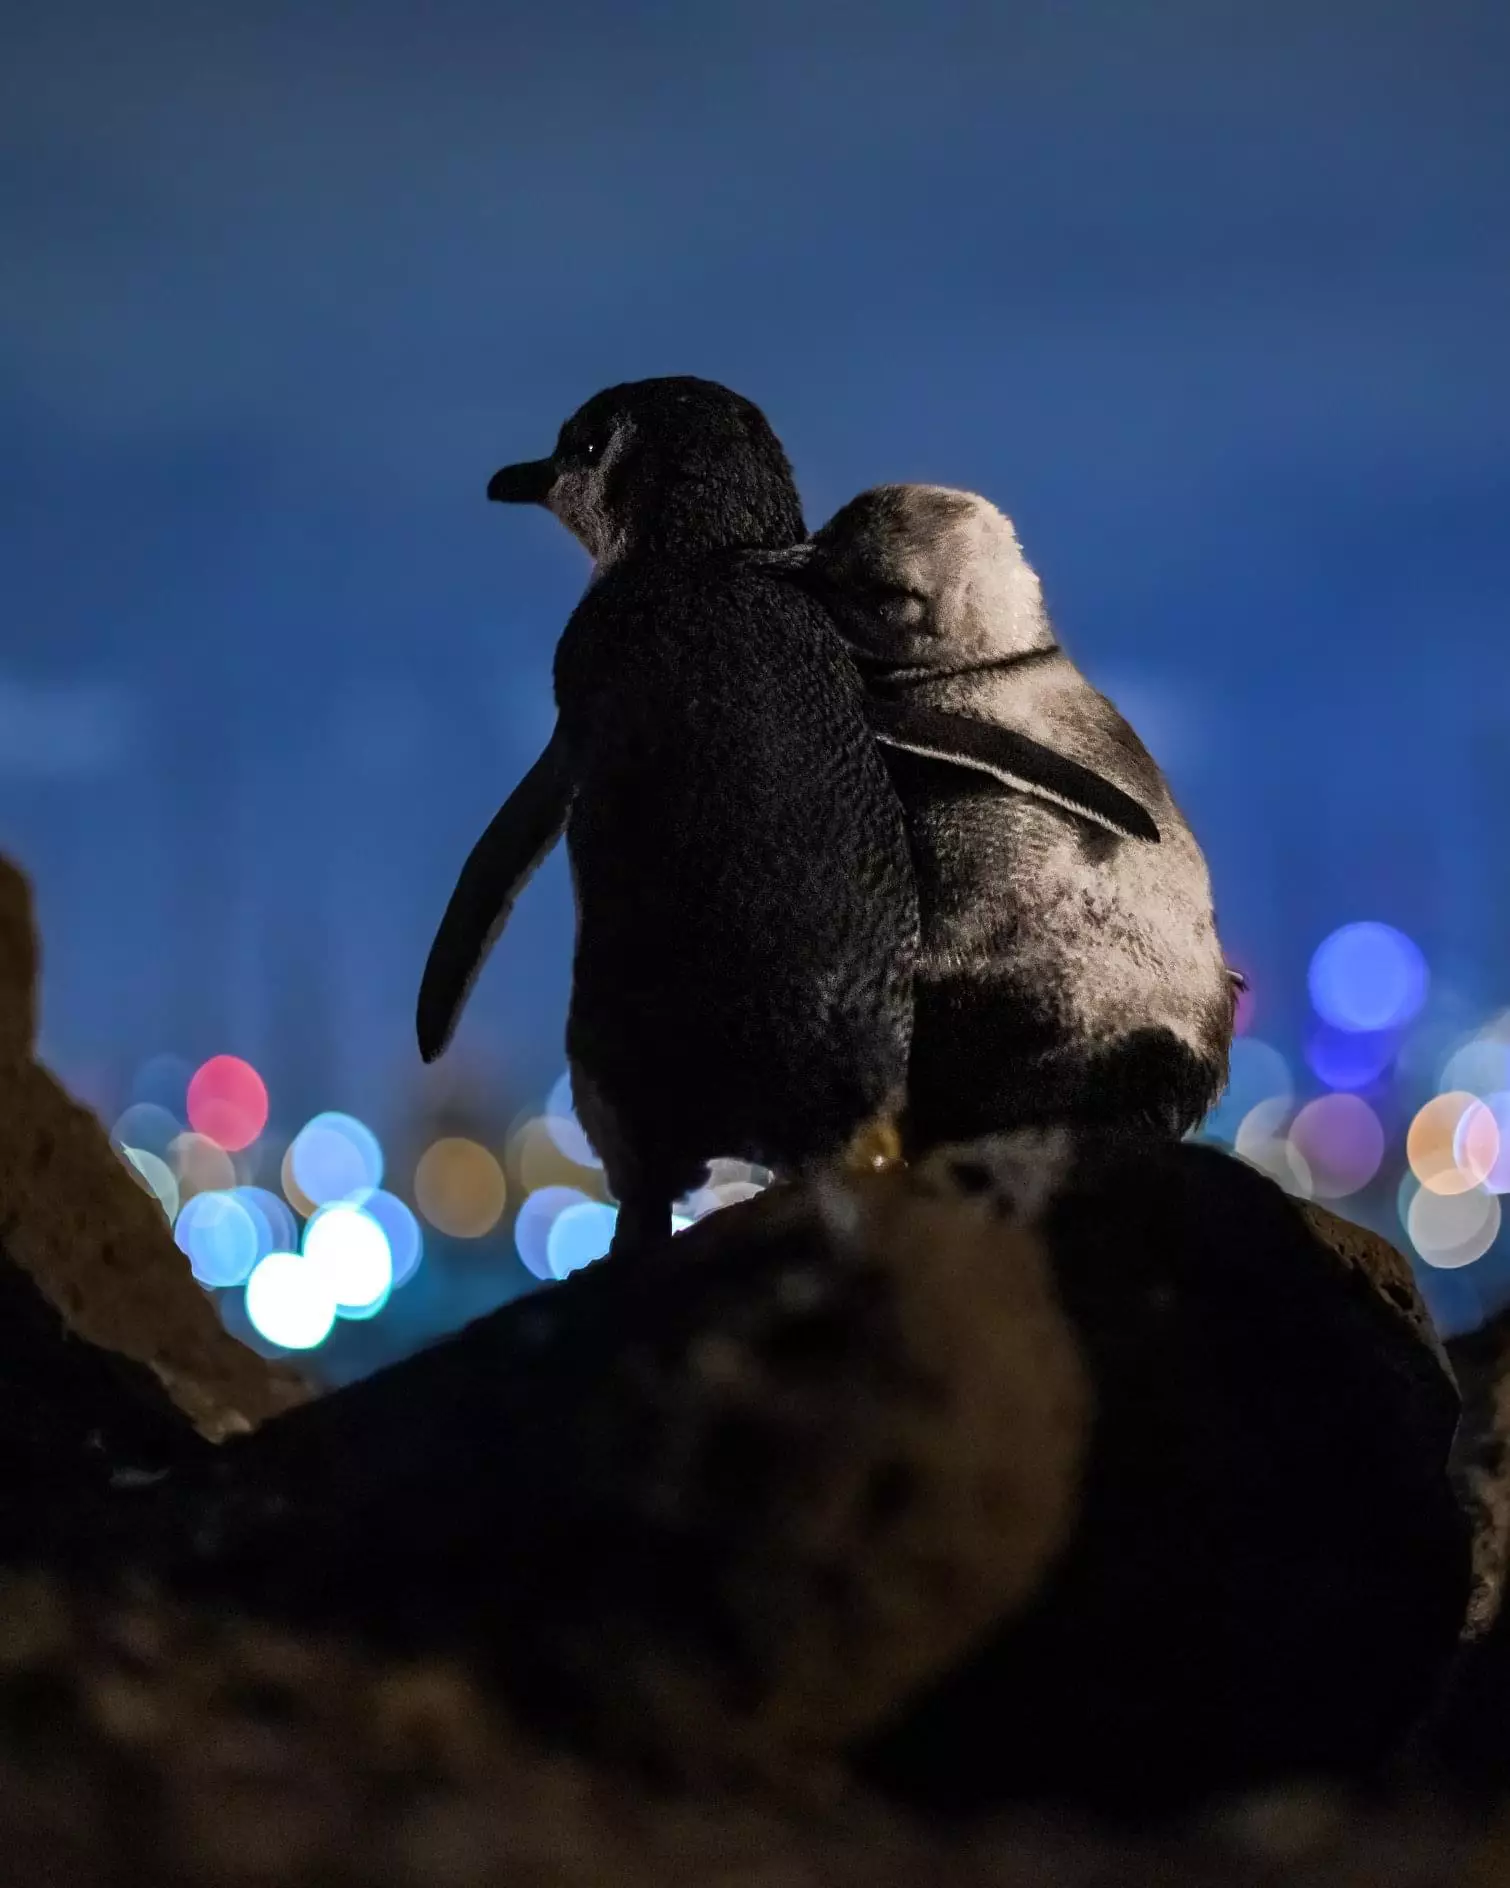 The penguins were snapped at at St Kilda Pier, Melbourne (